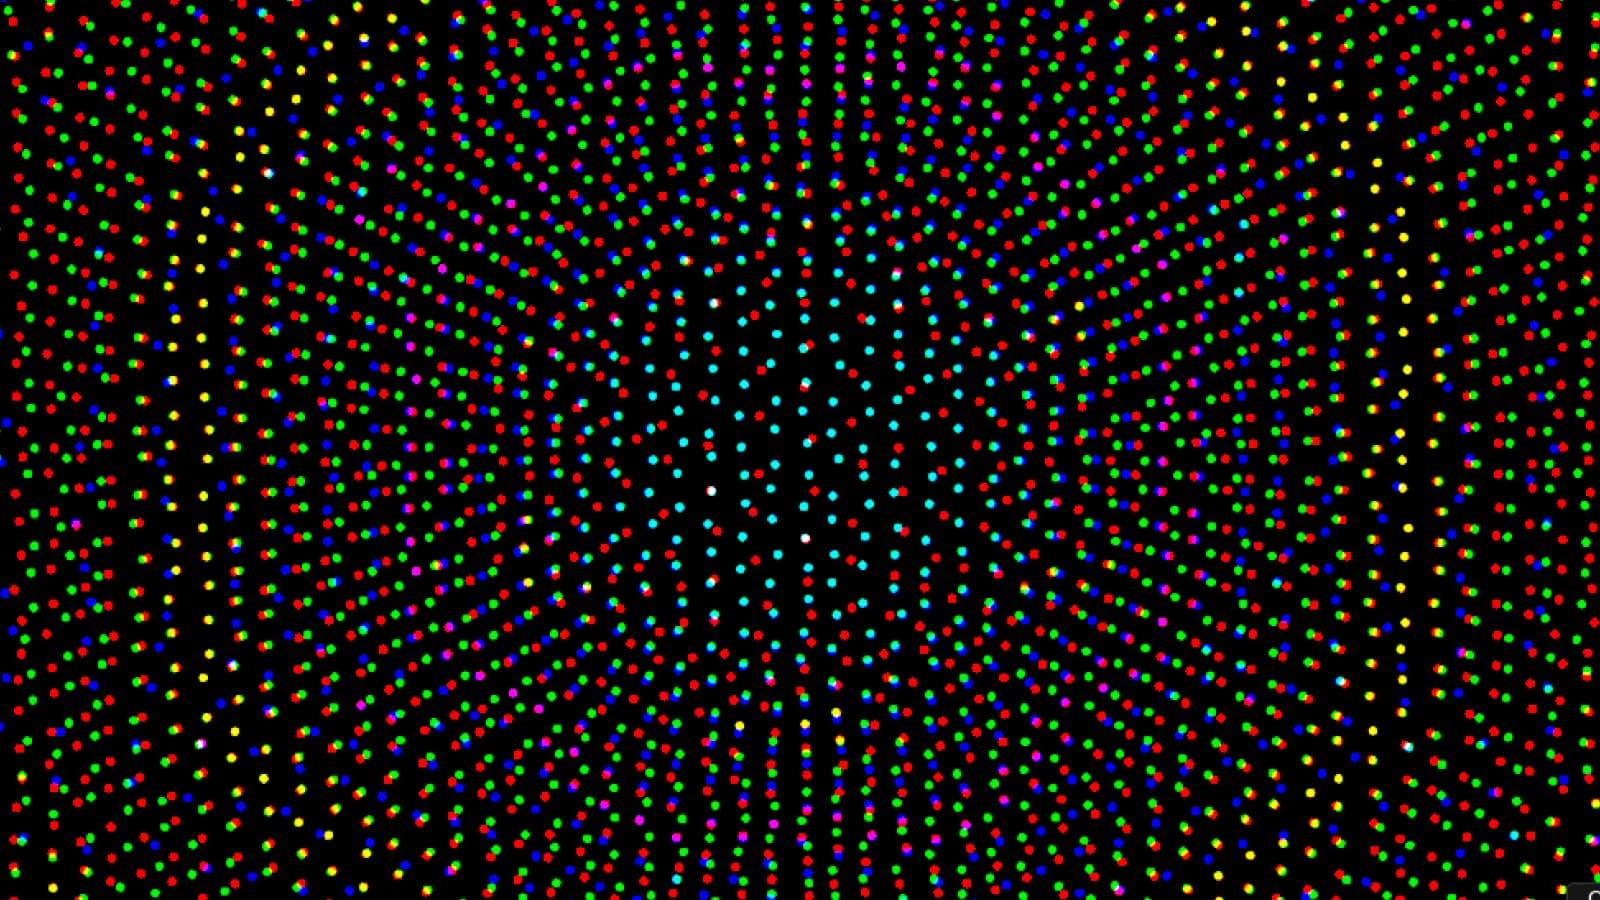 Breathing Dots